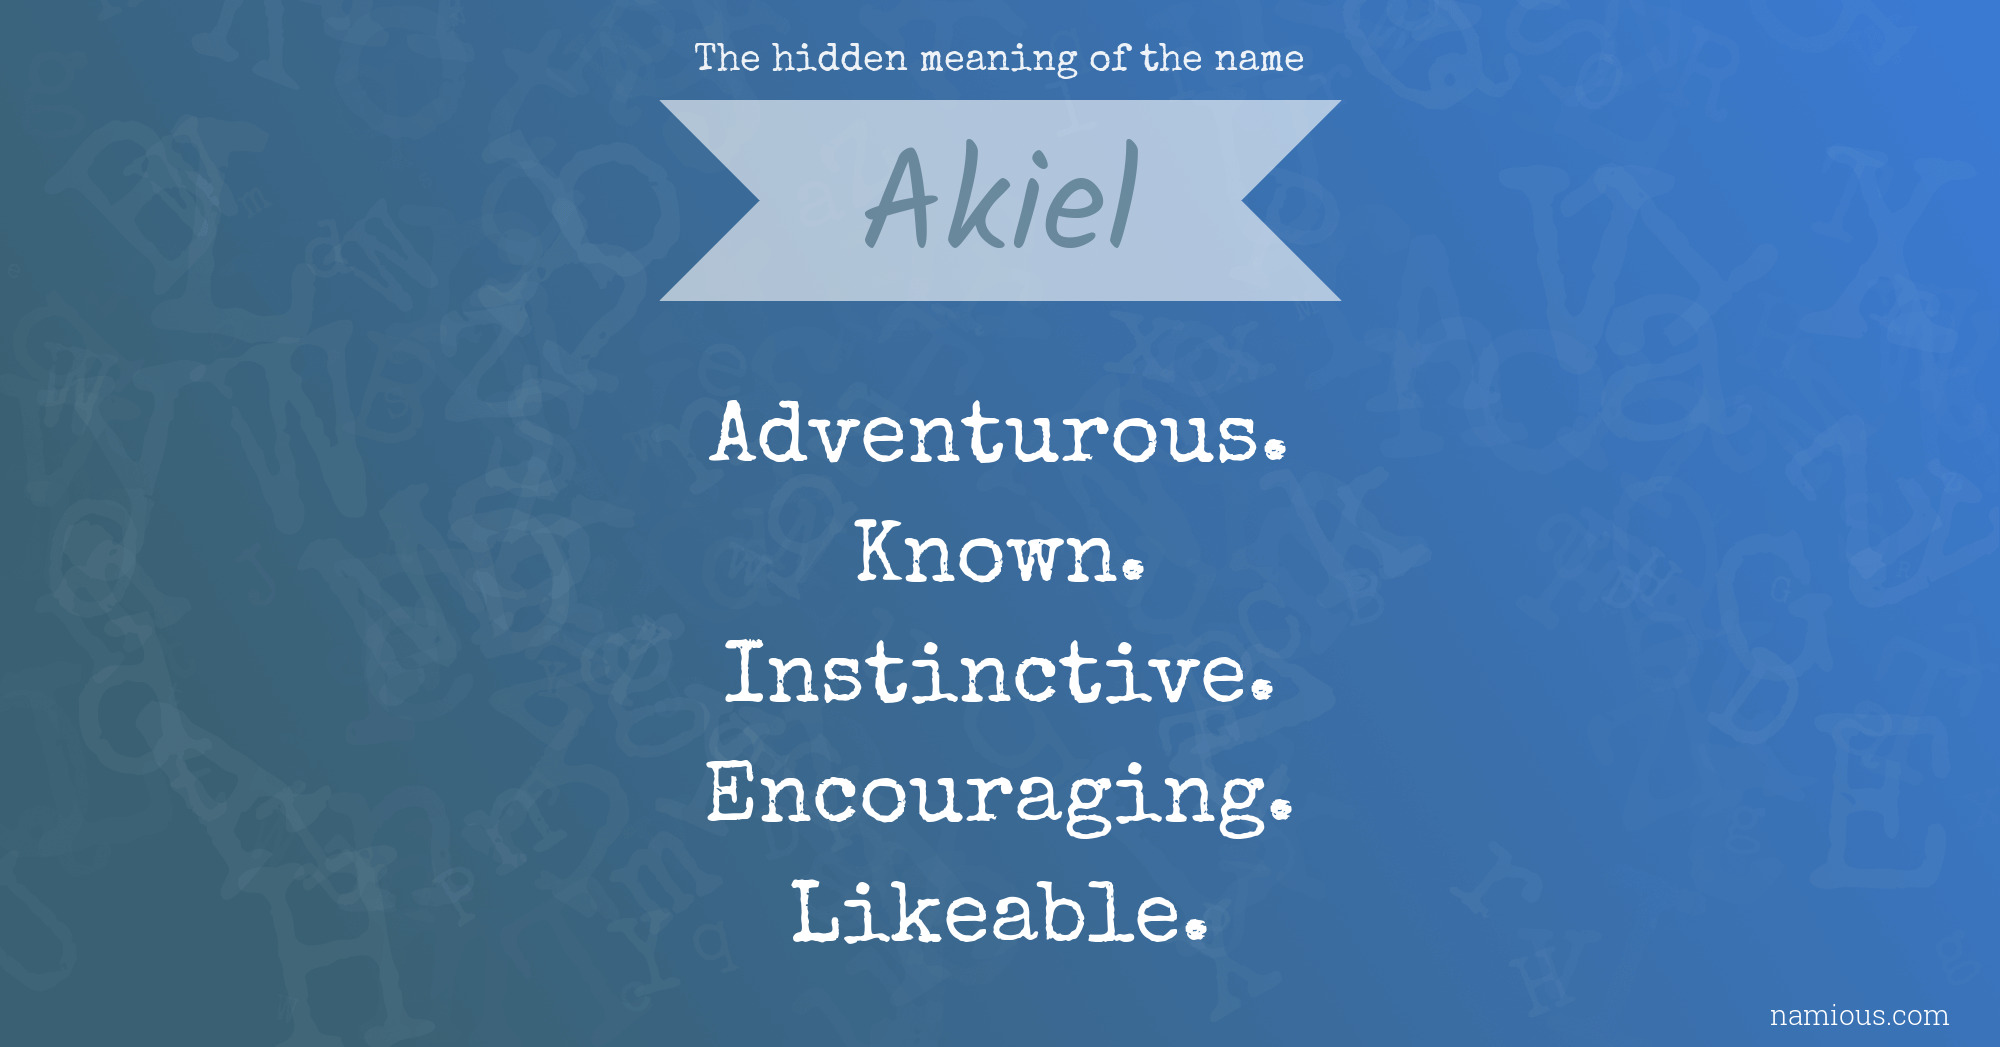 The hidden meaning of the name Akiel